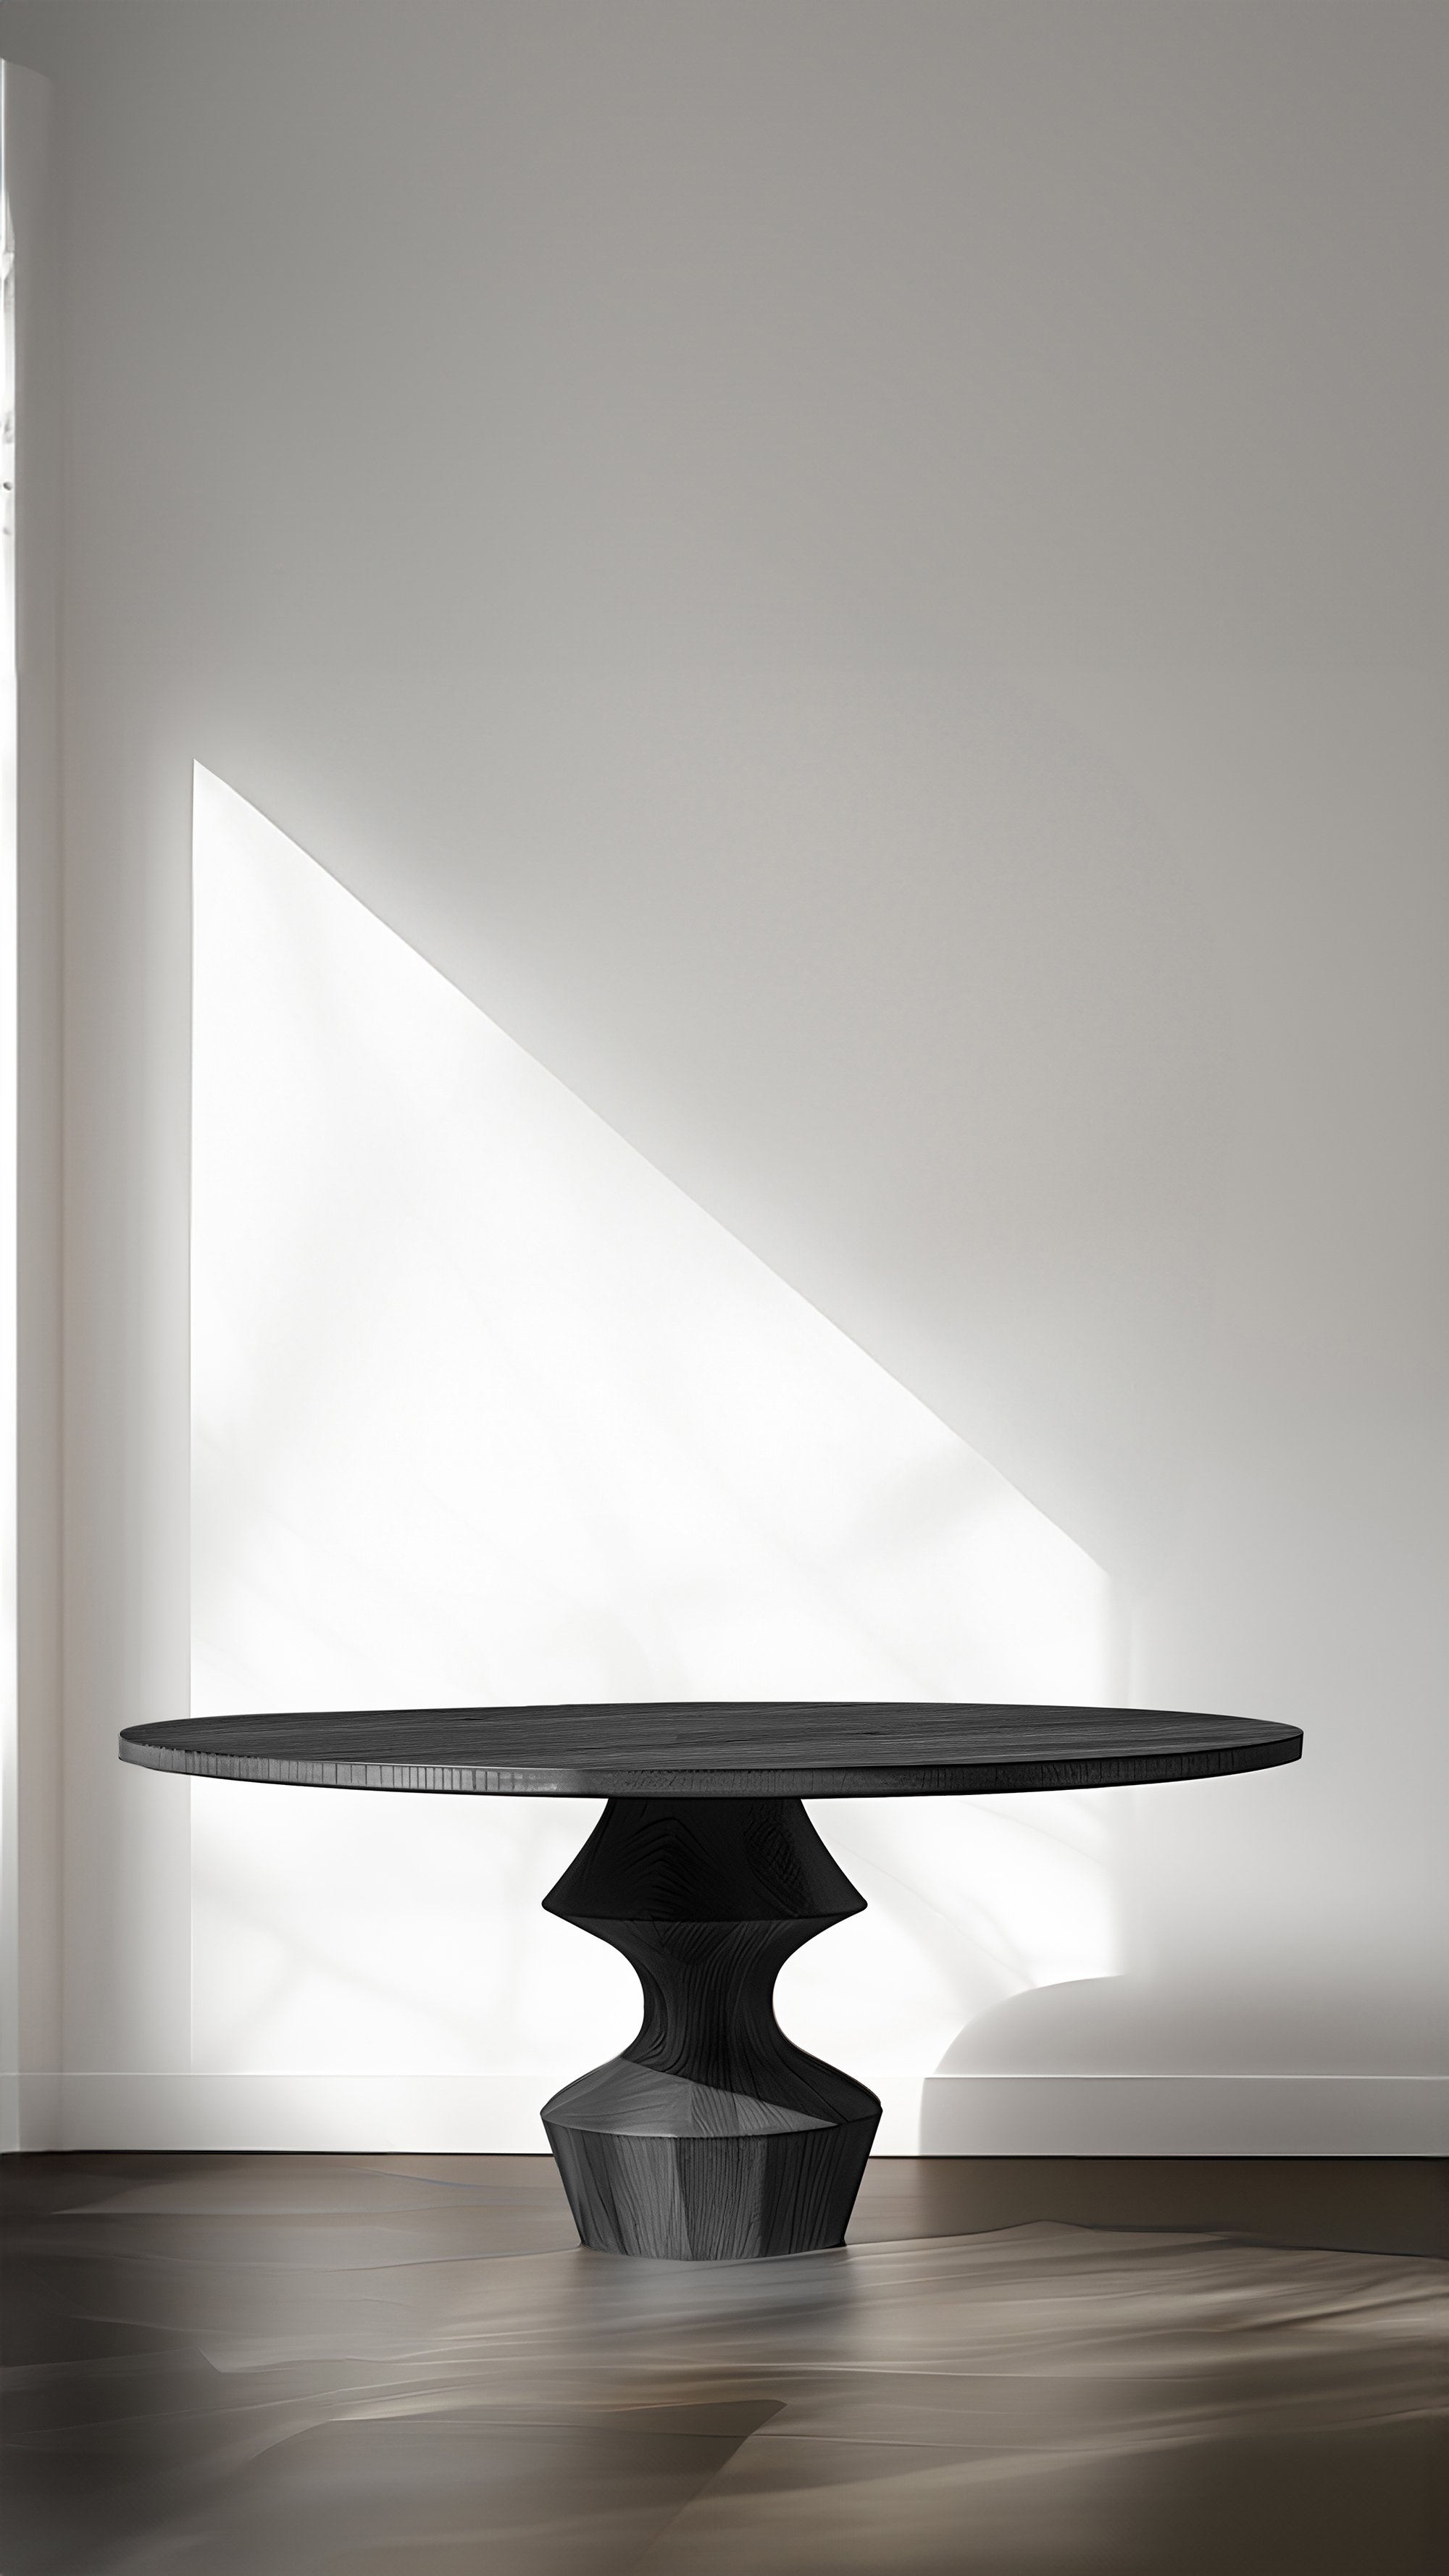 Socle Dessert Tables No11, Sweet Design in Black Solid Wood by NONO - 5.jpg